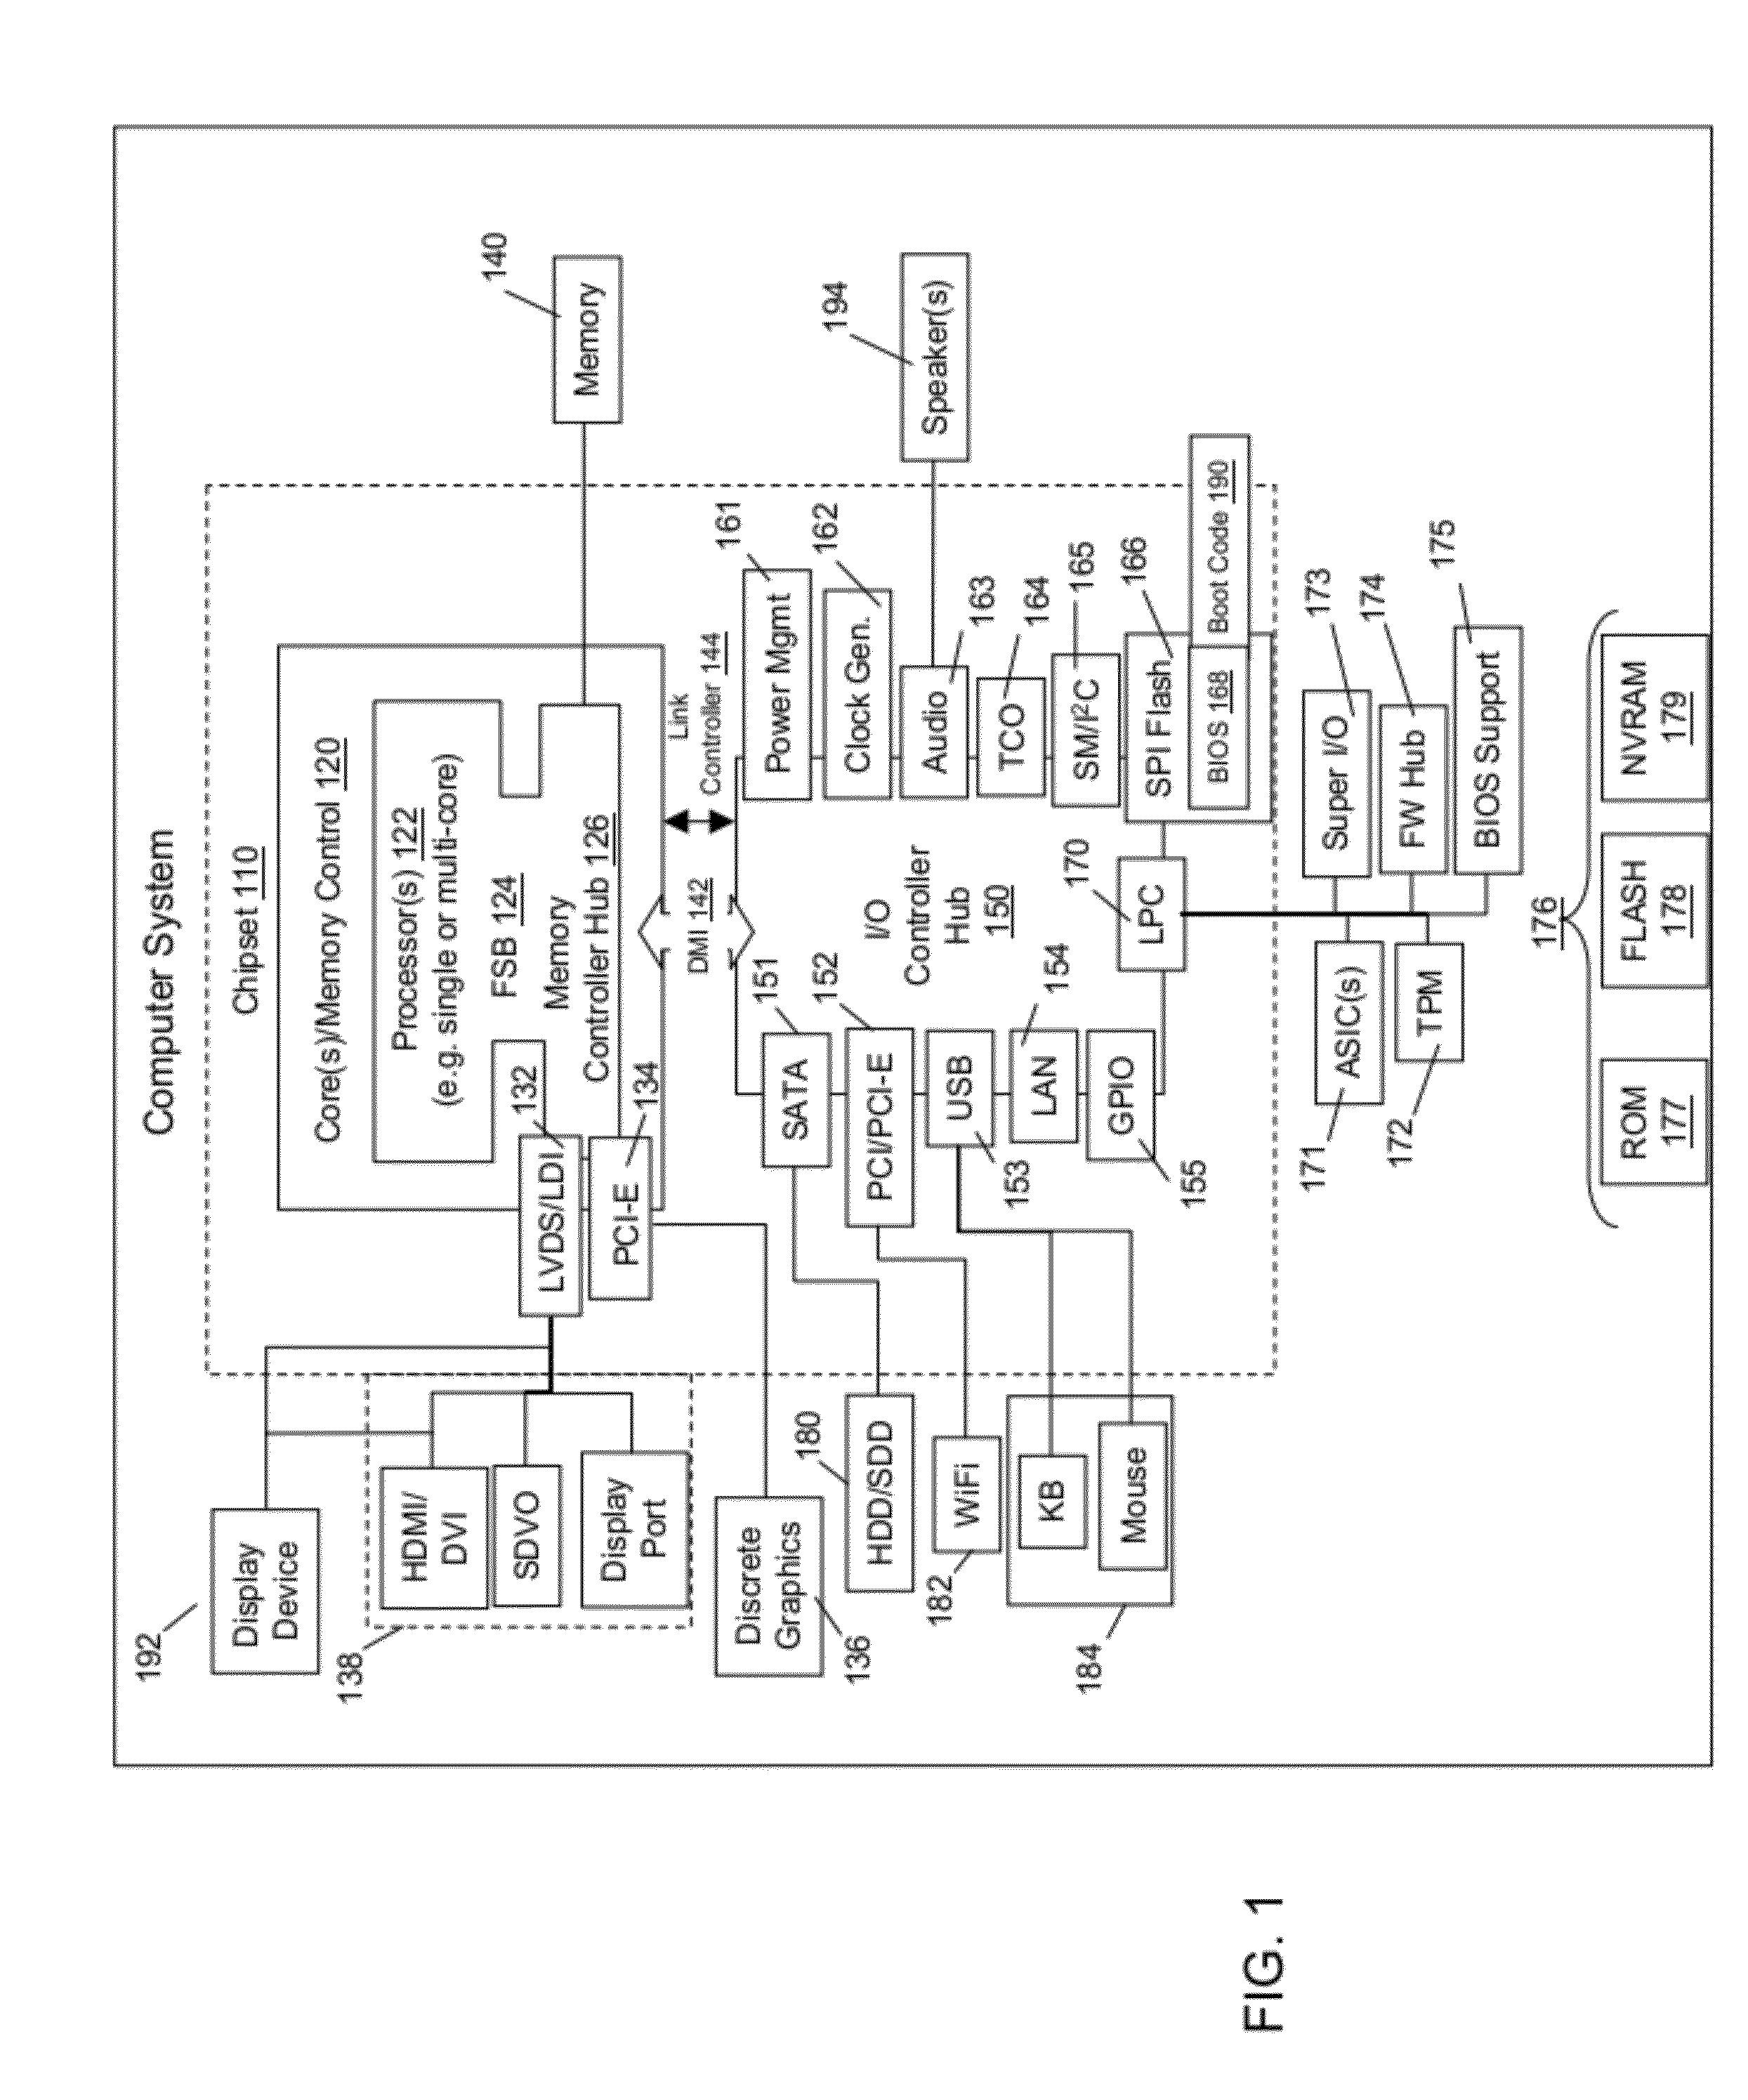 Systems and methods for achieving continuation of experience between components in a hybrid environment